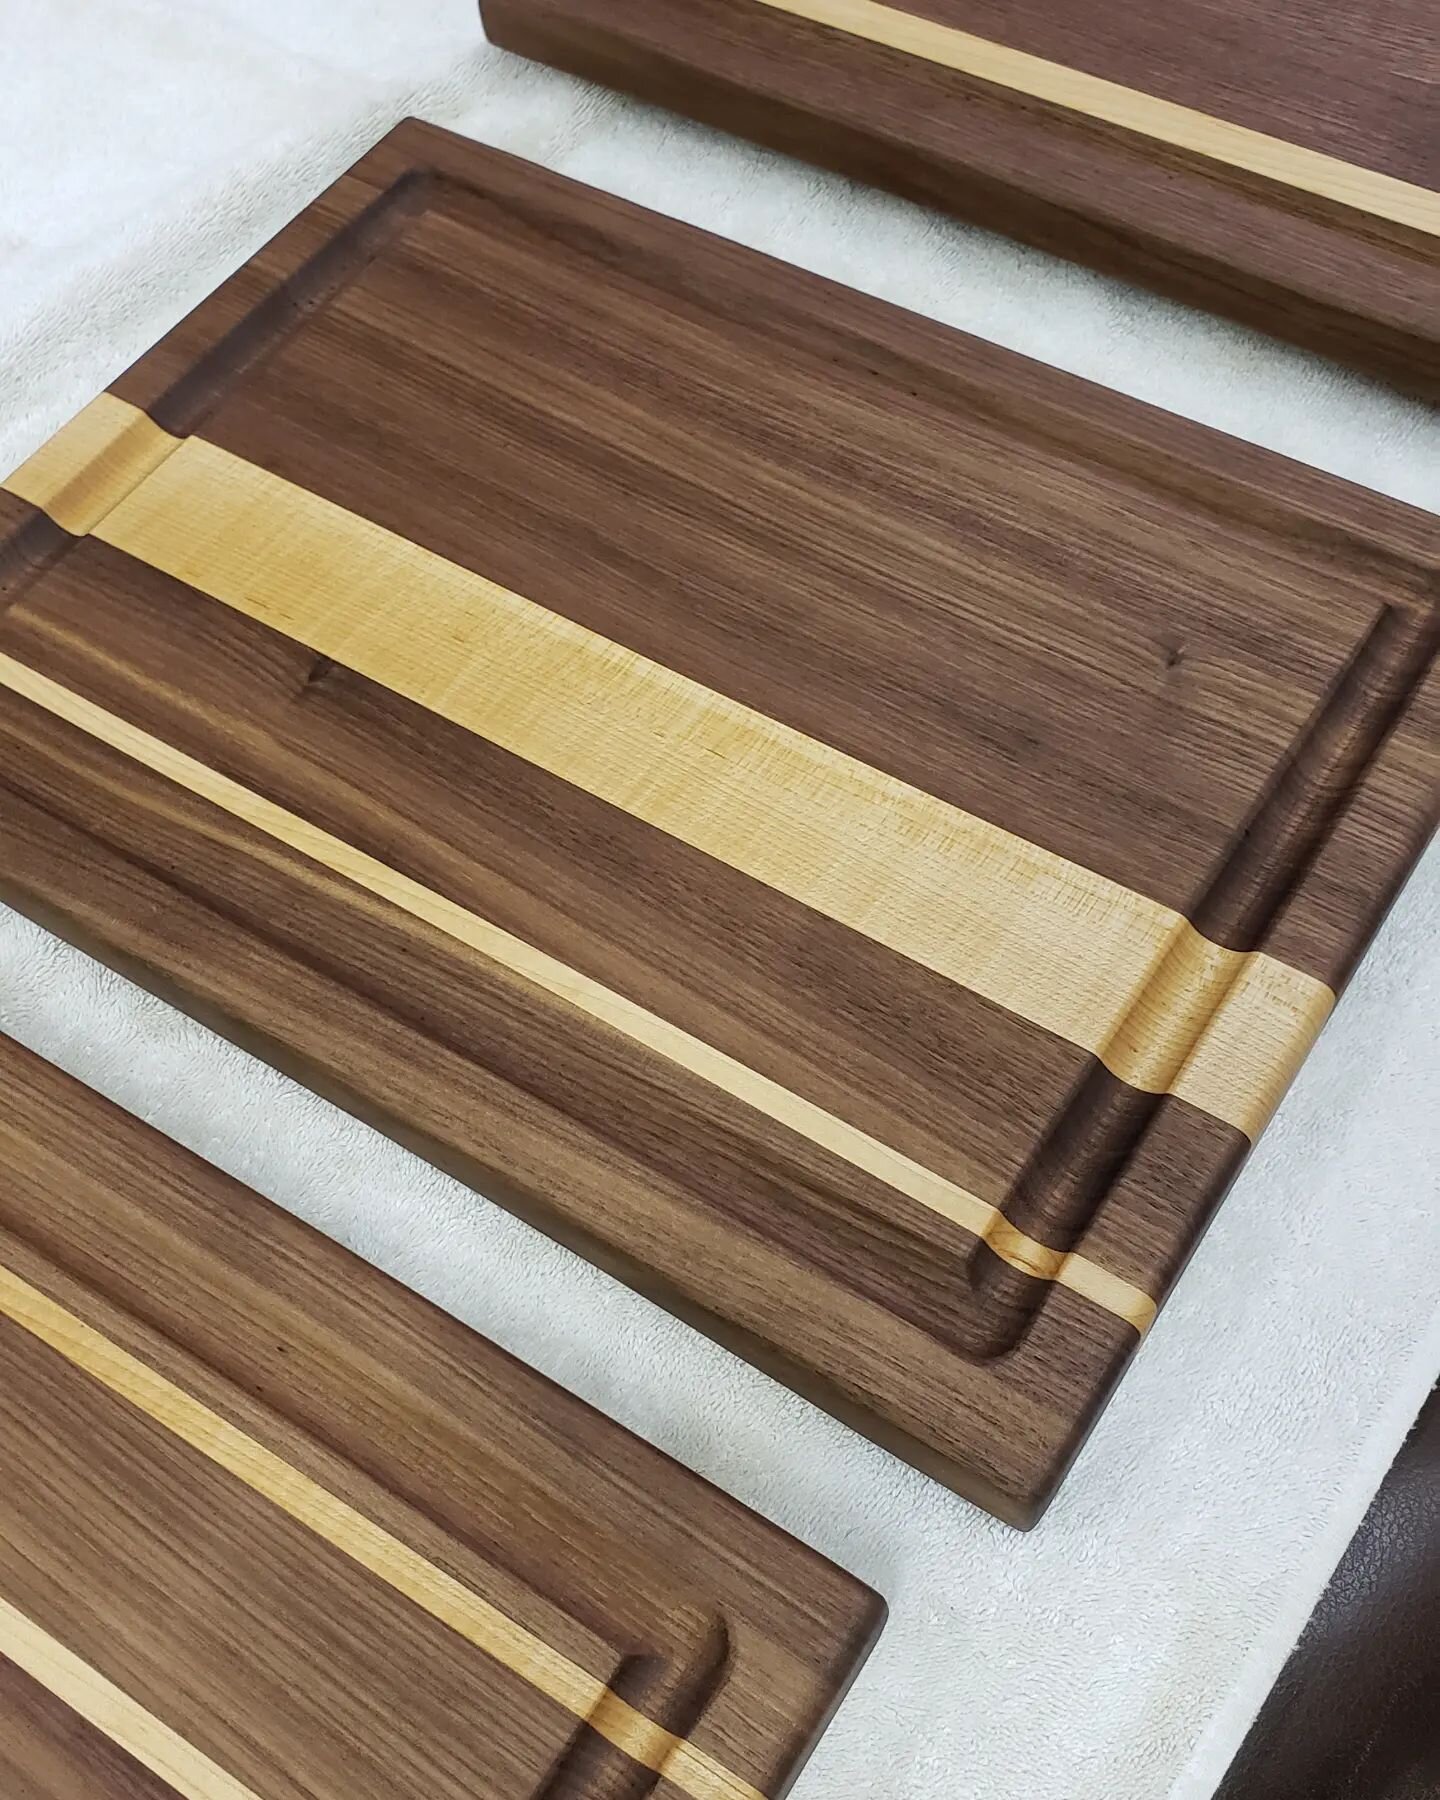 Simple, clean walnut with maple accents. Cutting board with juice groove on this side, smooth charcuterie board on the other side! Versatile and solid.
#versatile #solid #wellbuilt #handcrafted #madeinamerica #smallbusiness
#cuttingboard #charcuterie